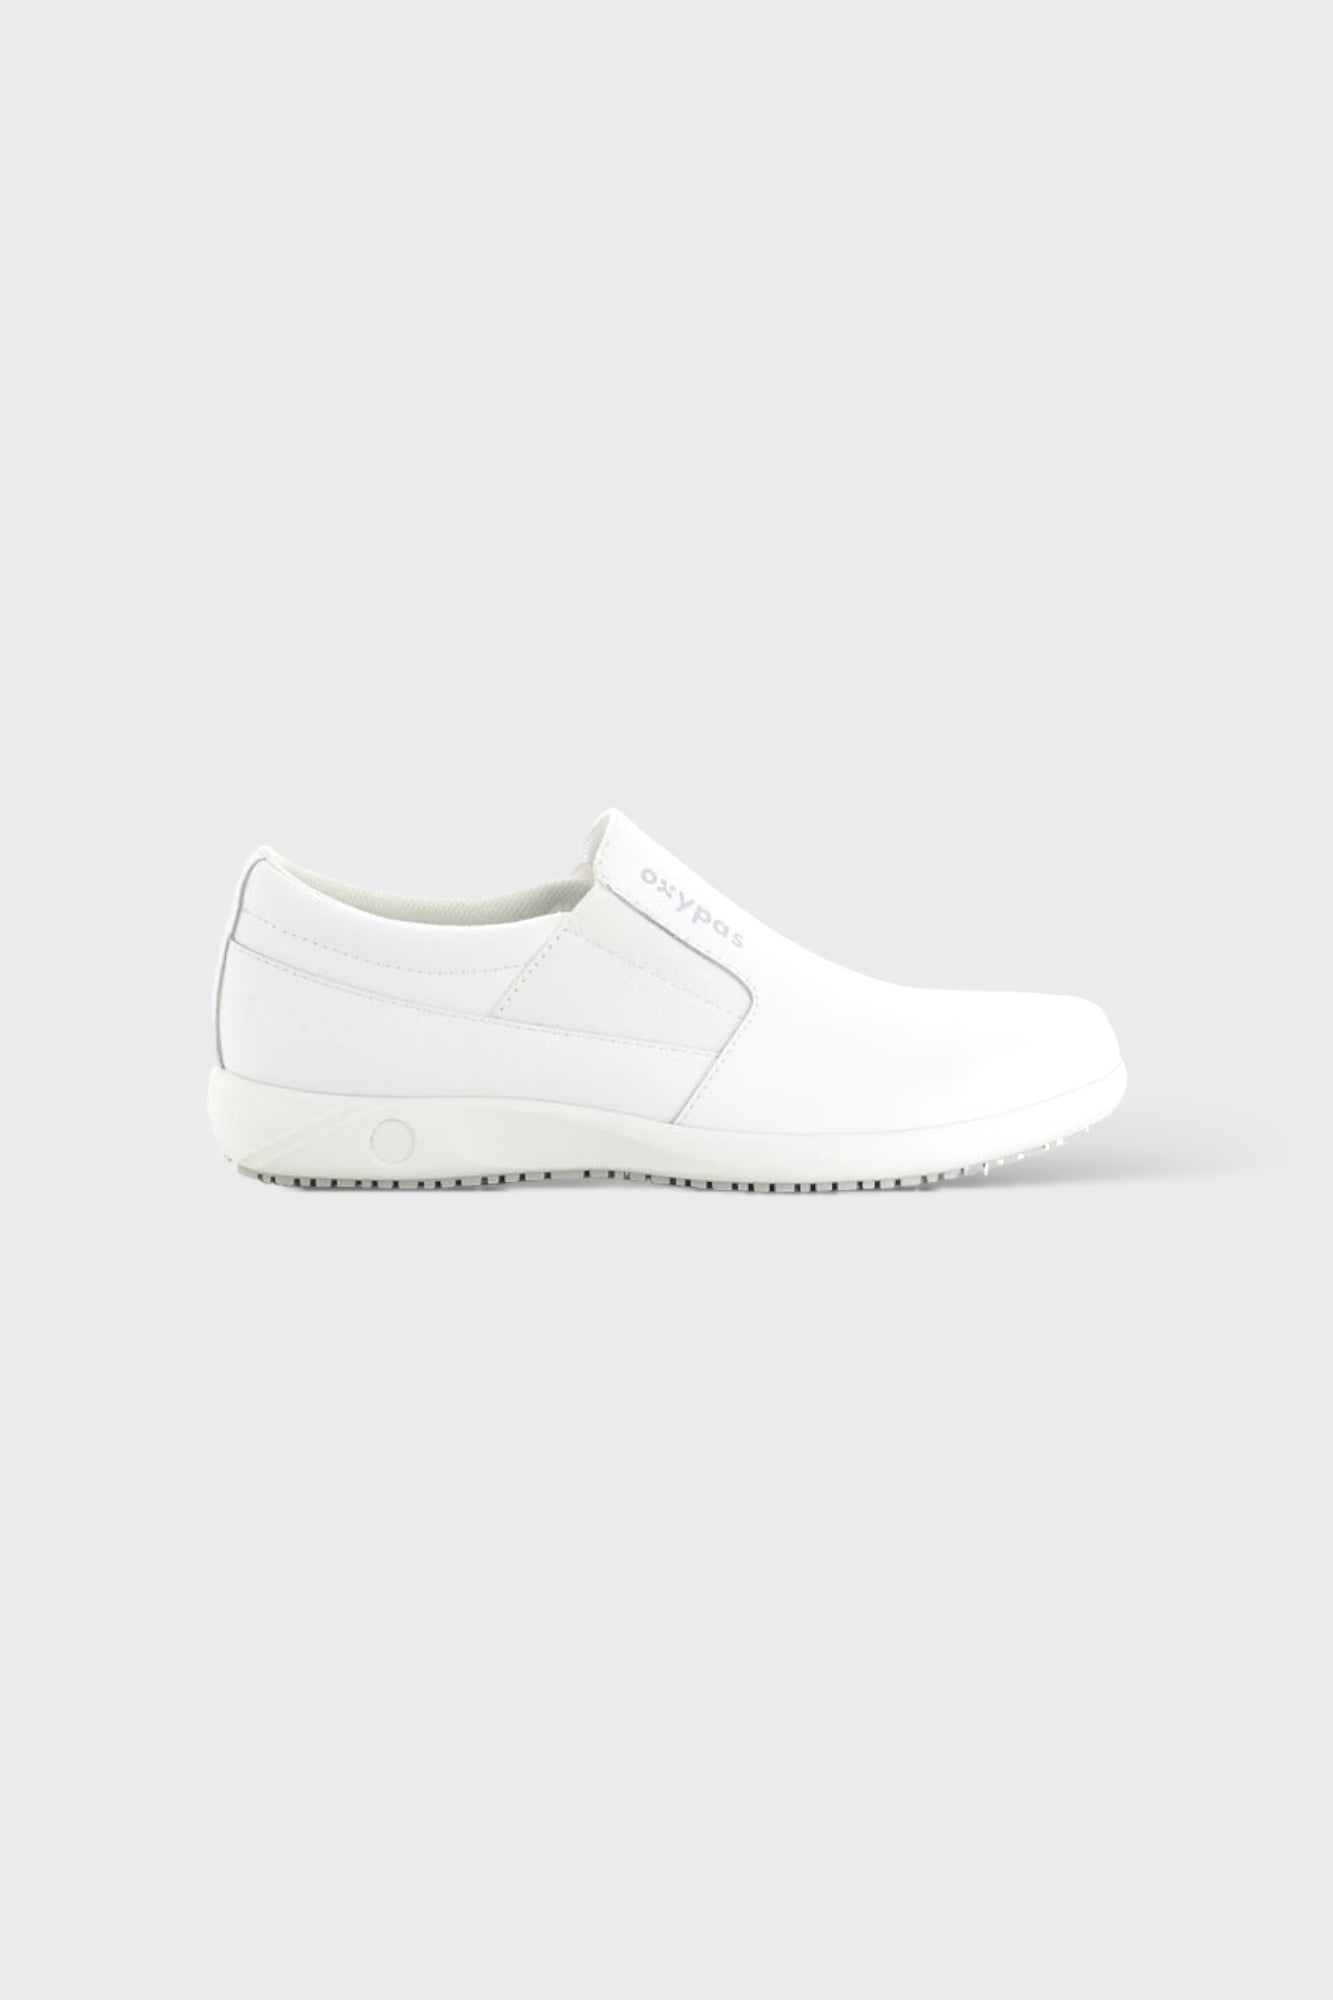 ROY - SPORTY LOAFER IN LEATHER FOR MEN